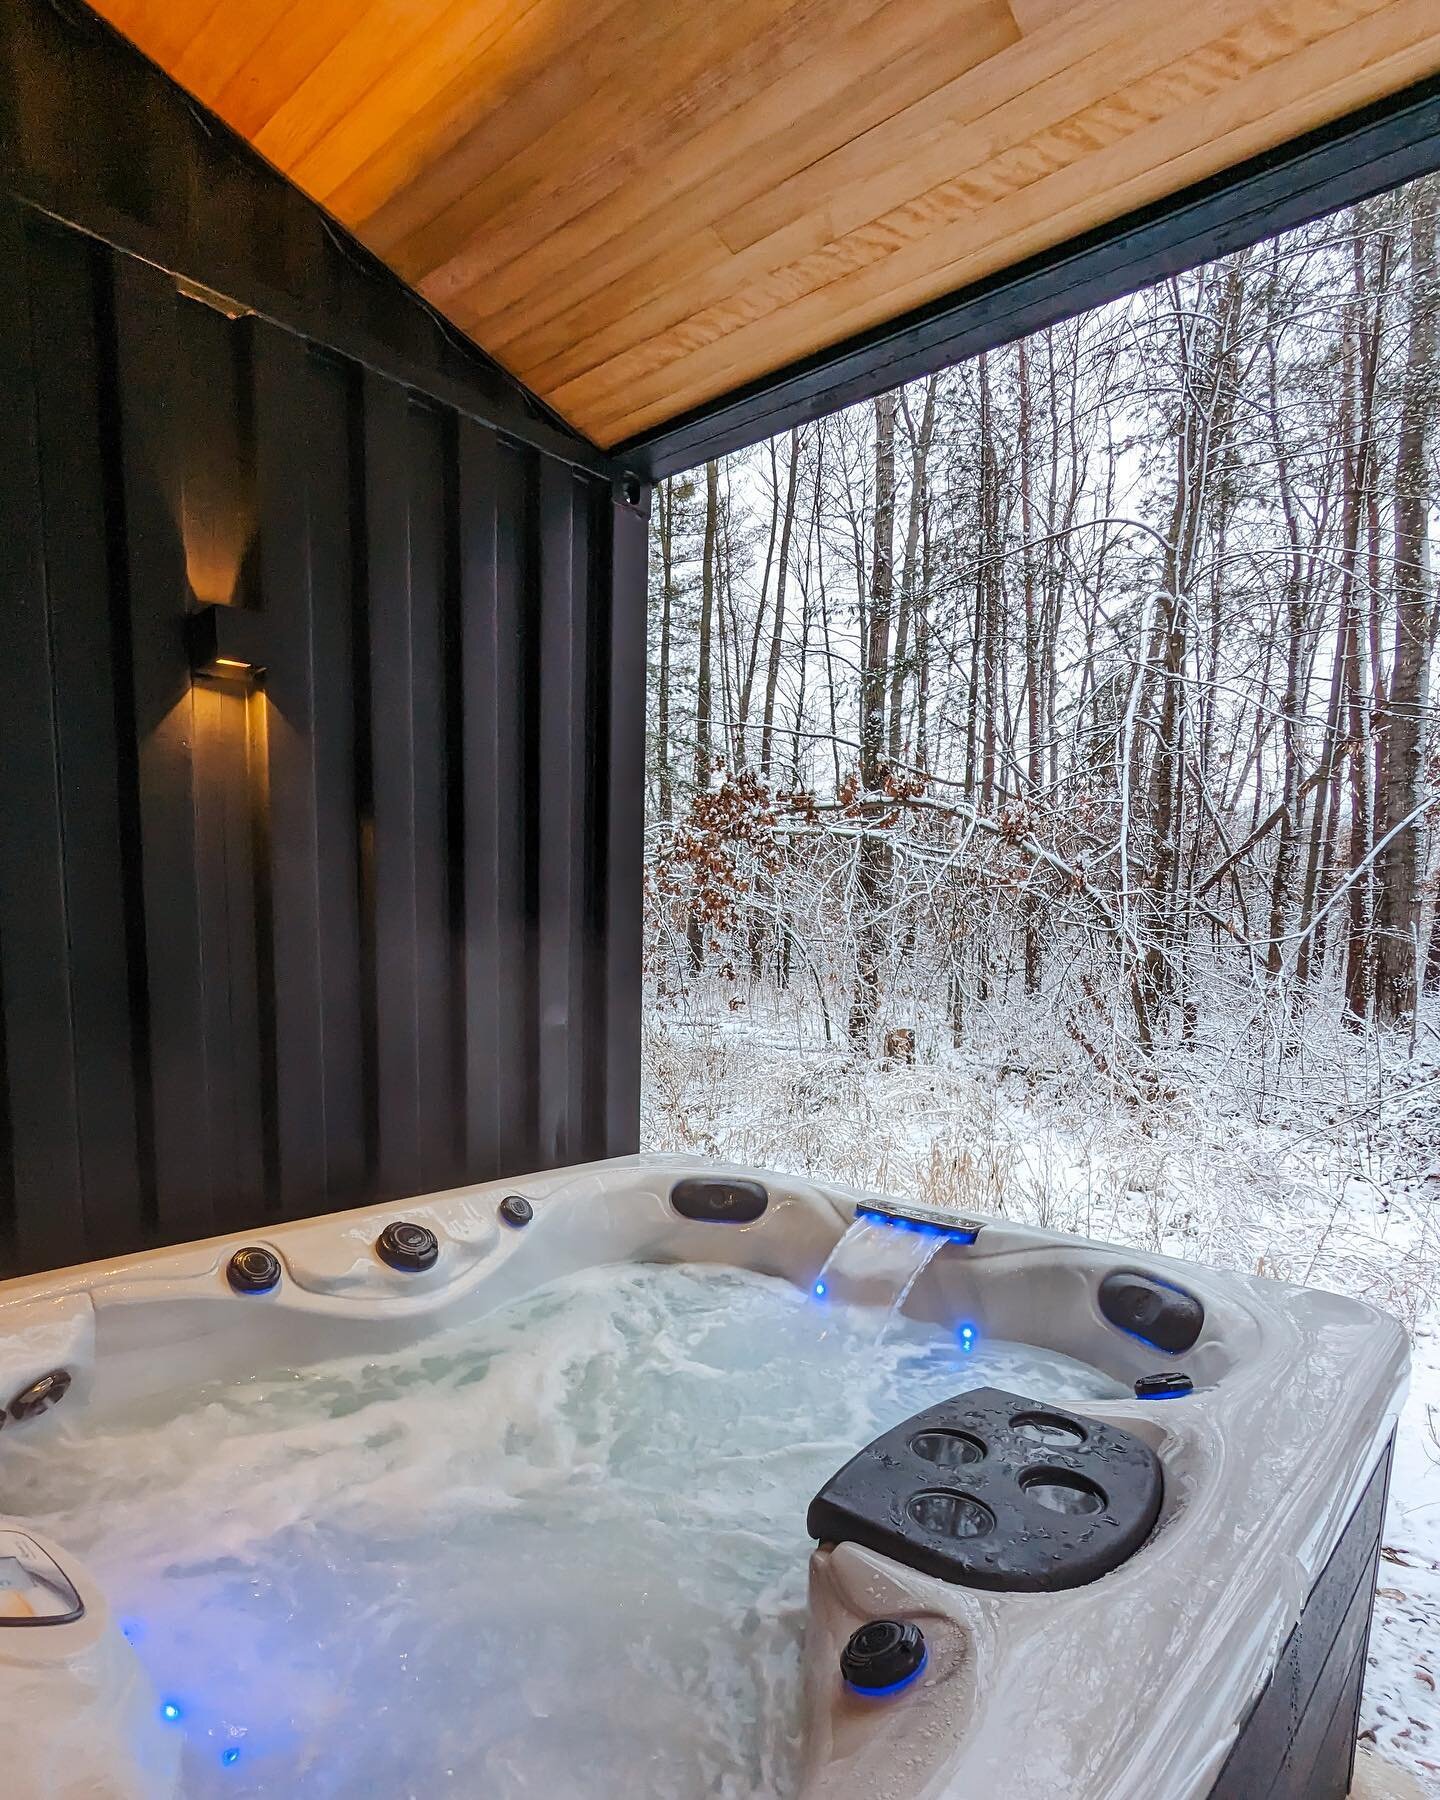 Minnesota&rsquo;s winter wonderland is finally here &ndash; a bit fashionably late, but absolutely worth the wait! How do you plan to embrace this snowy delight? A) Dive into our cozy hot tub, letting the tranquil snowflakes set the scene for relaxat